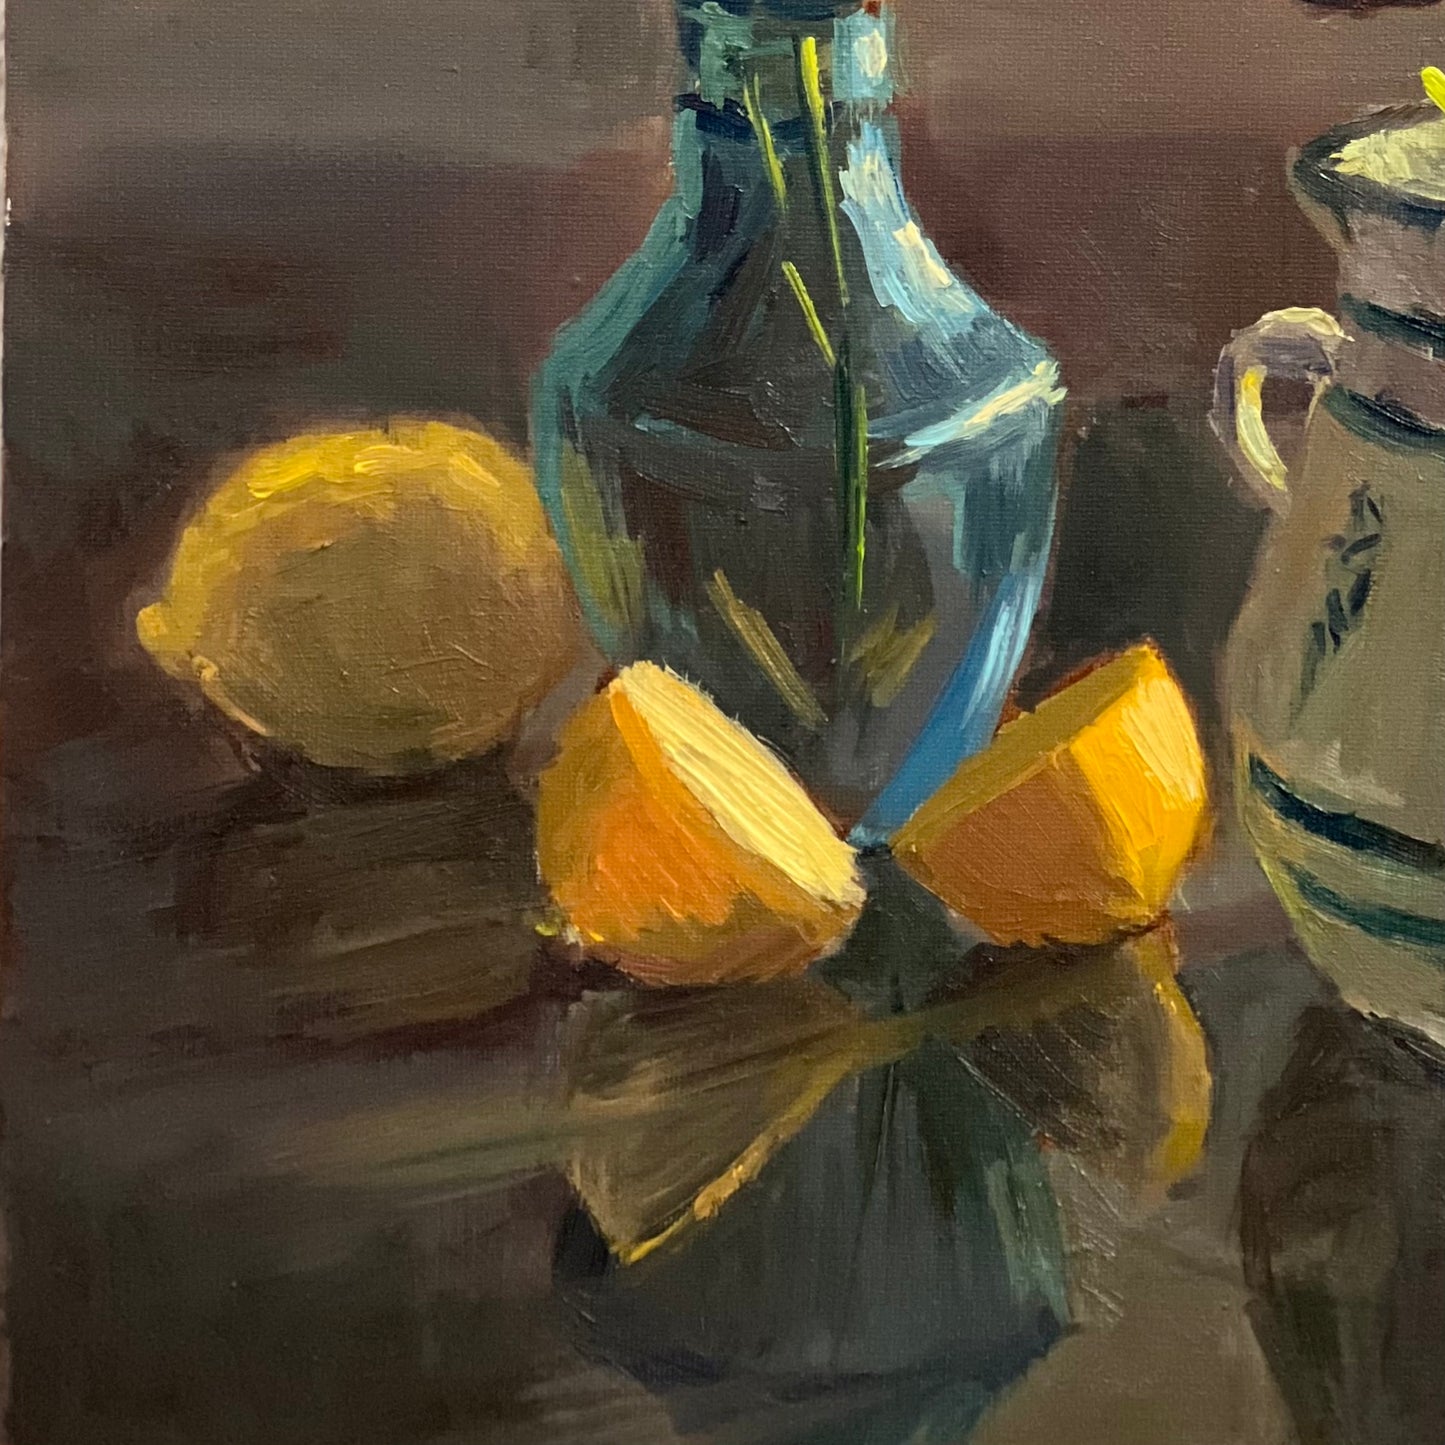 Backlit Lemons and Blue Jars in the kitchen - Still Life Oil Painting